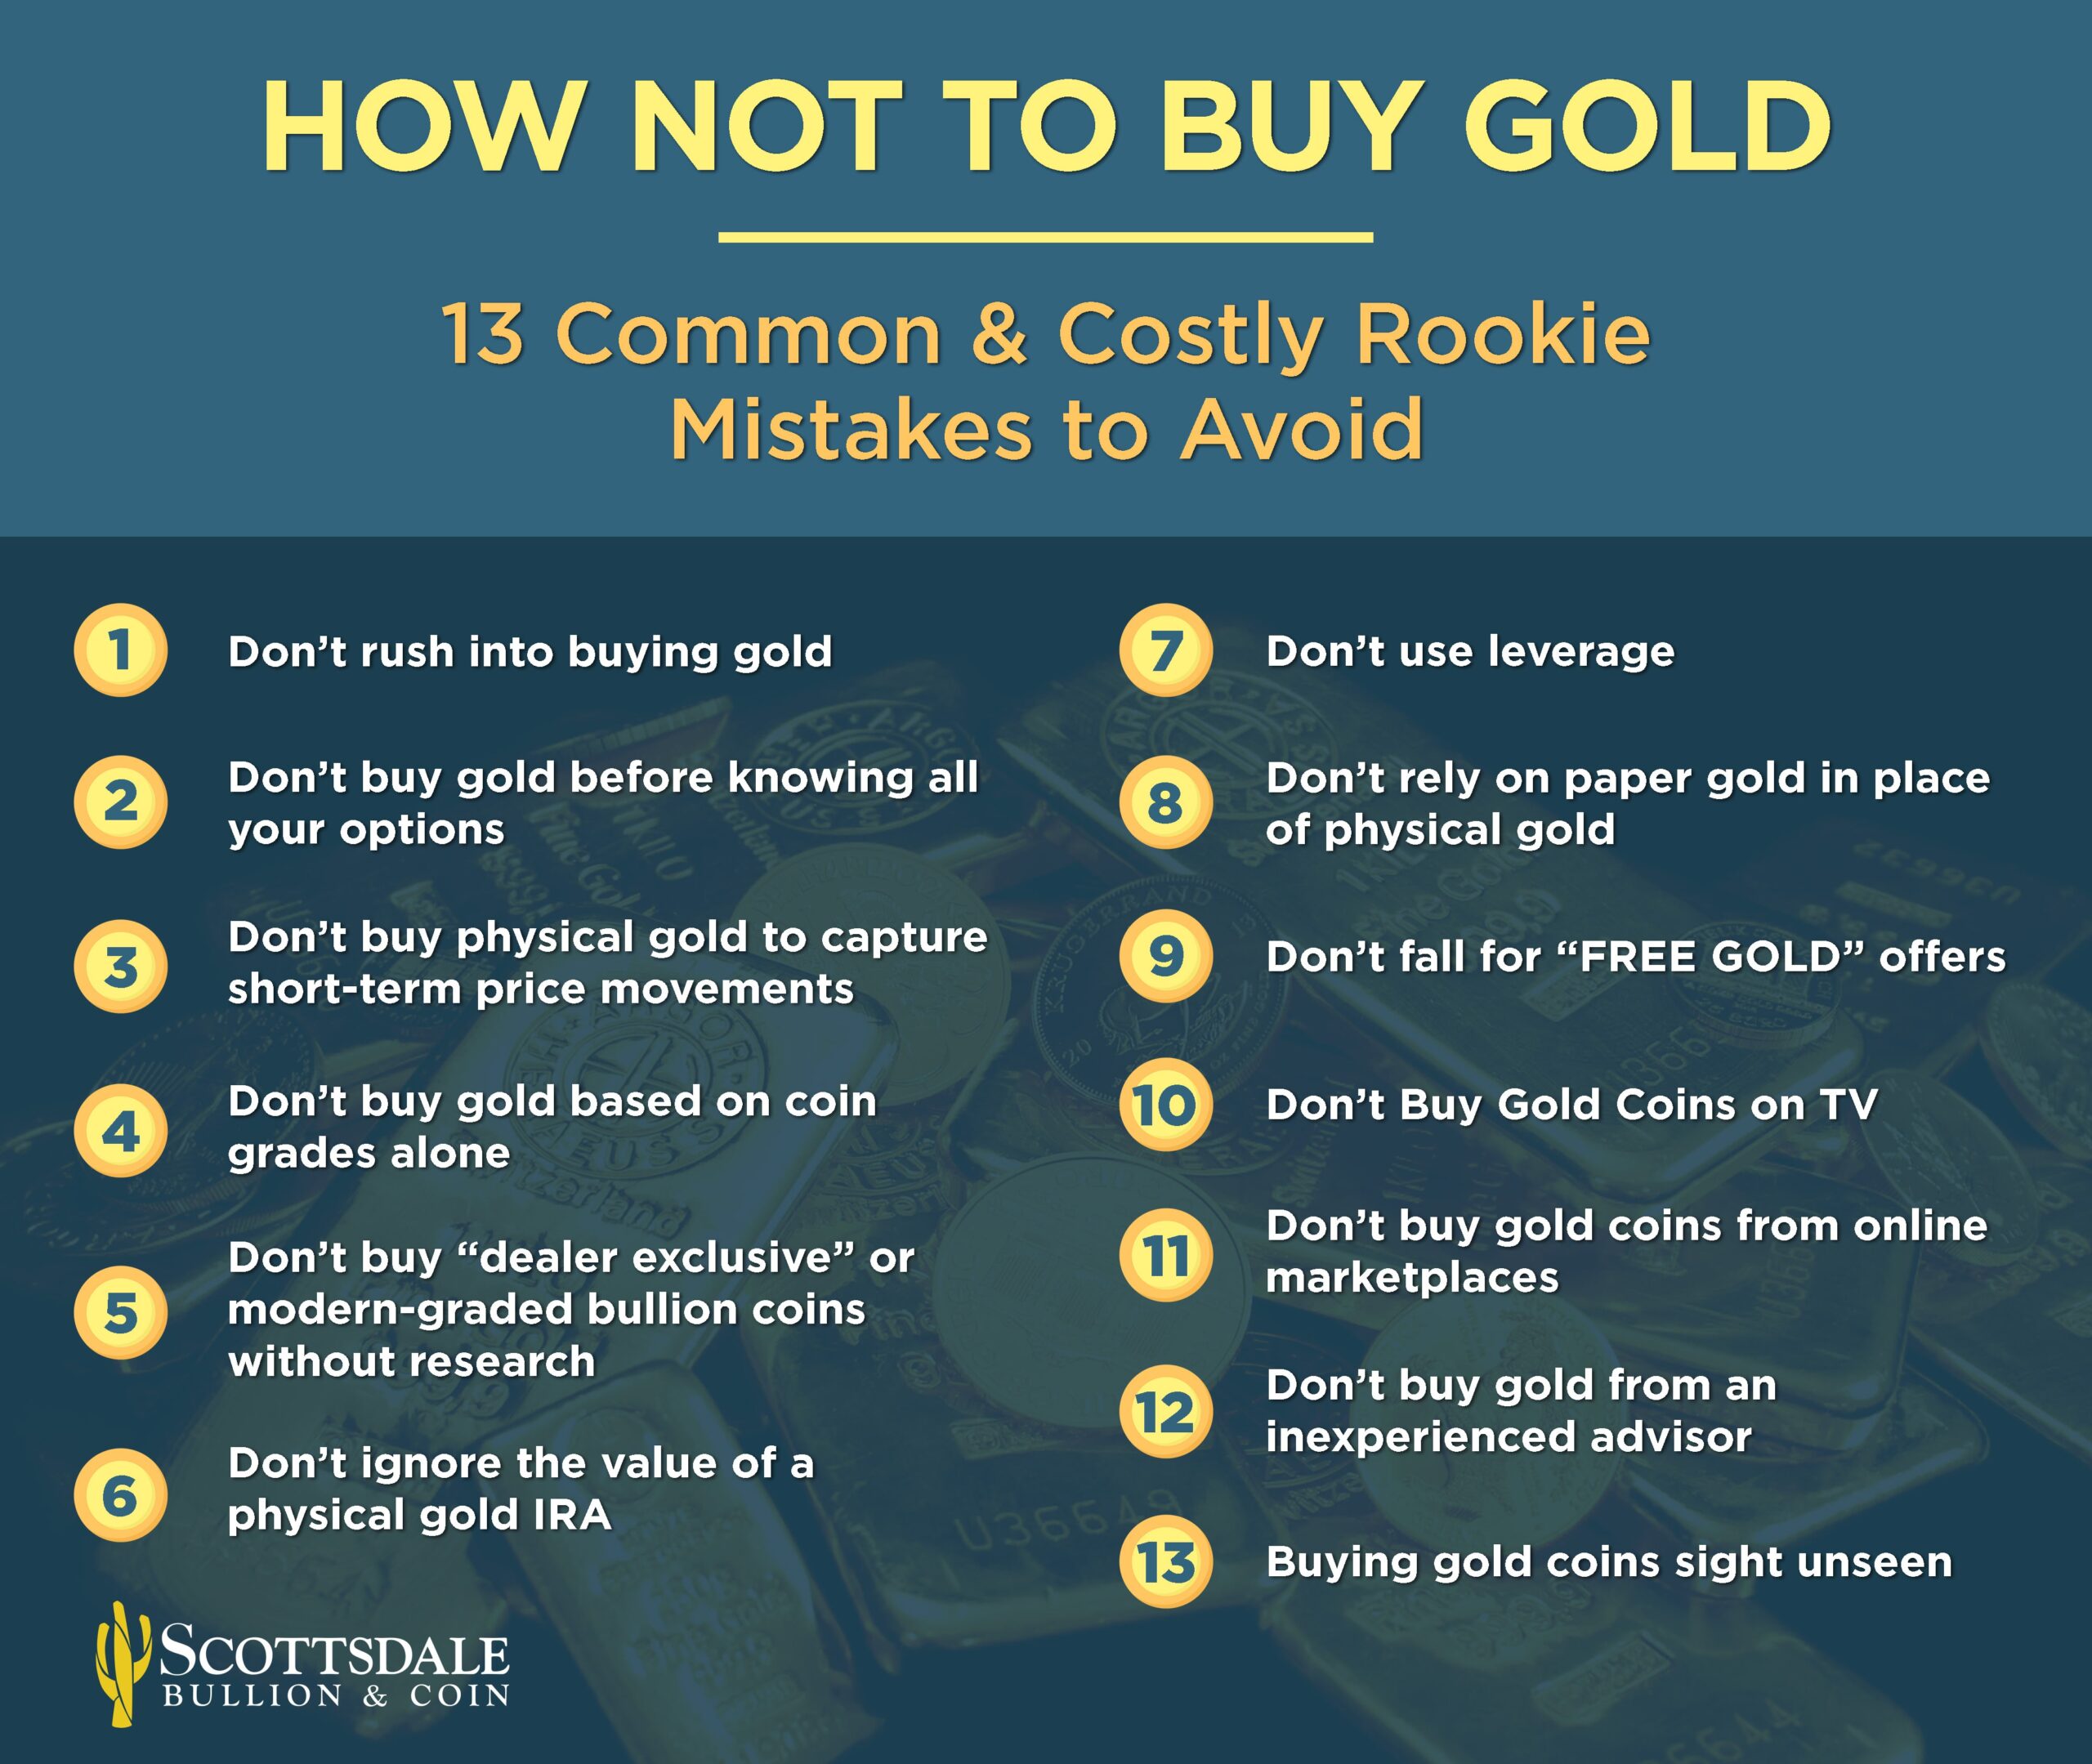 The Cheapest Ways & Places to Buy Gold - 2022 Guide